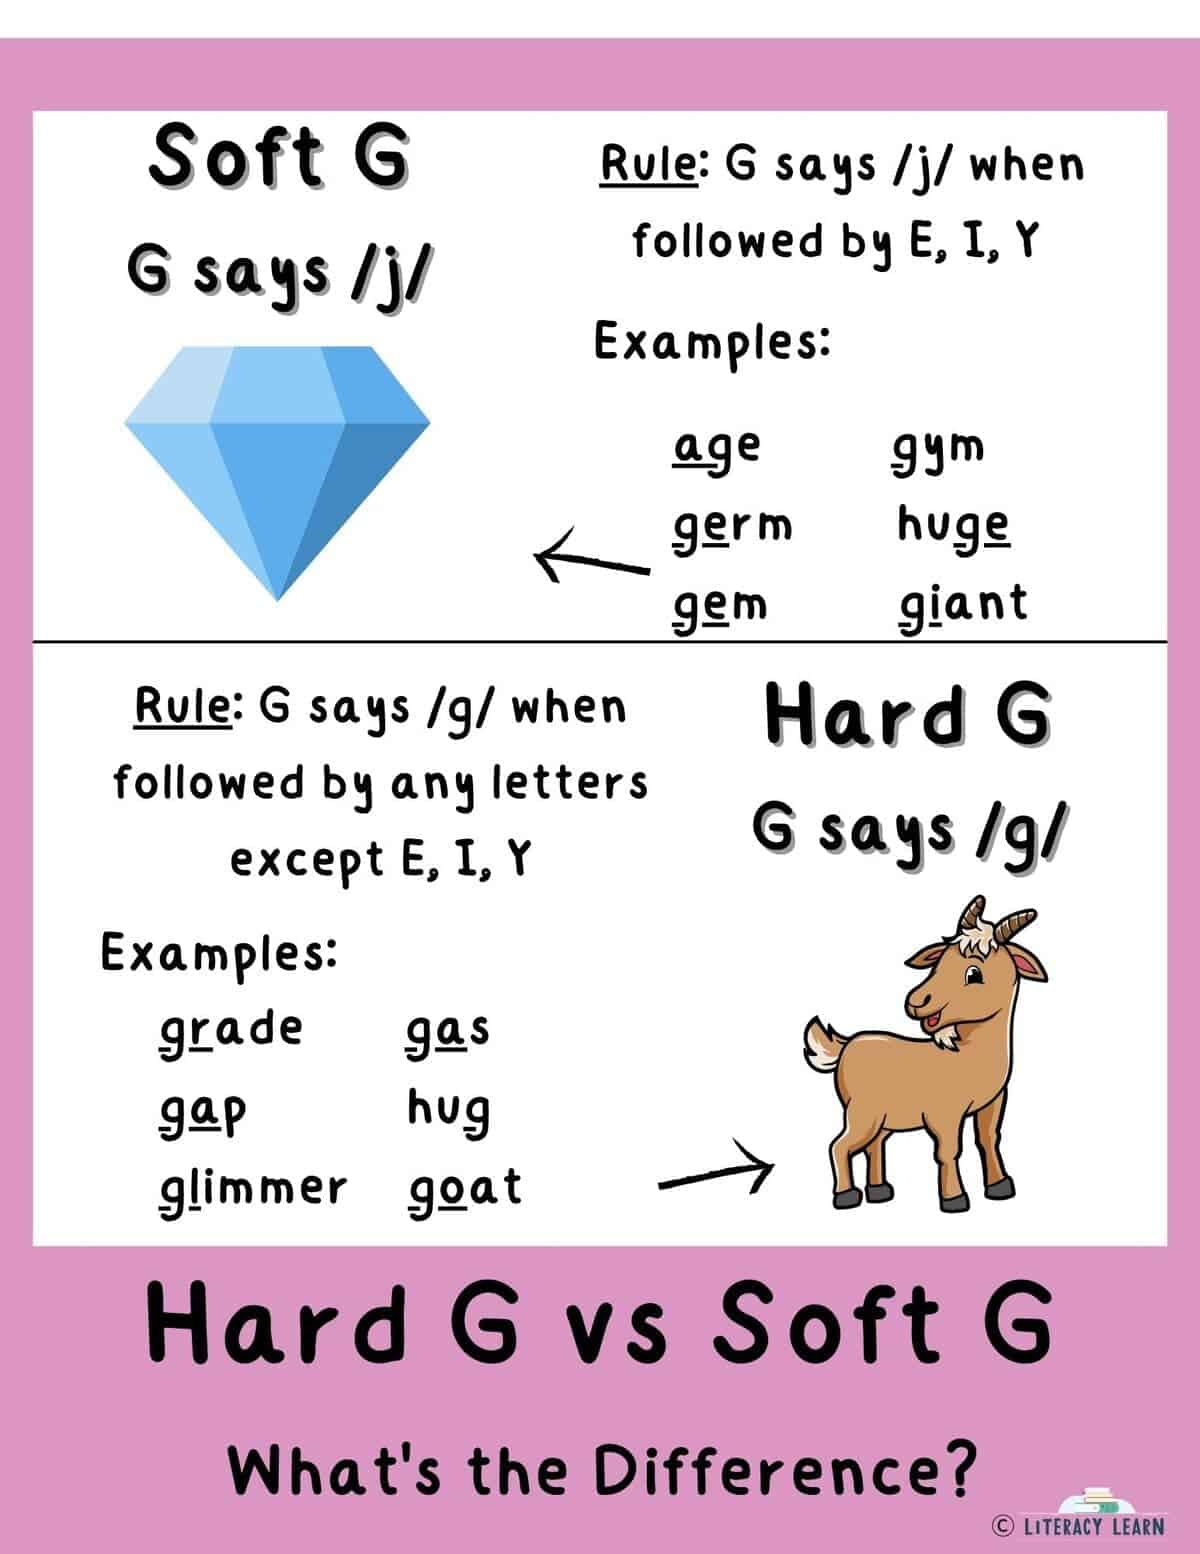 Visual with the difference between hard G and soft G with rules, pictures, and example words.